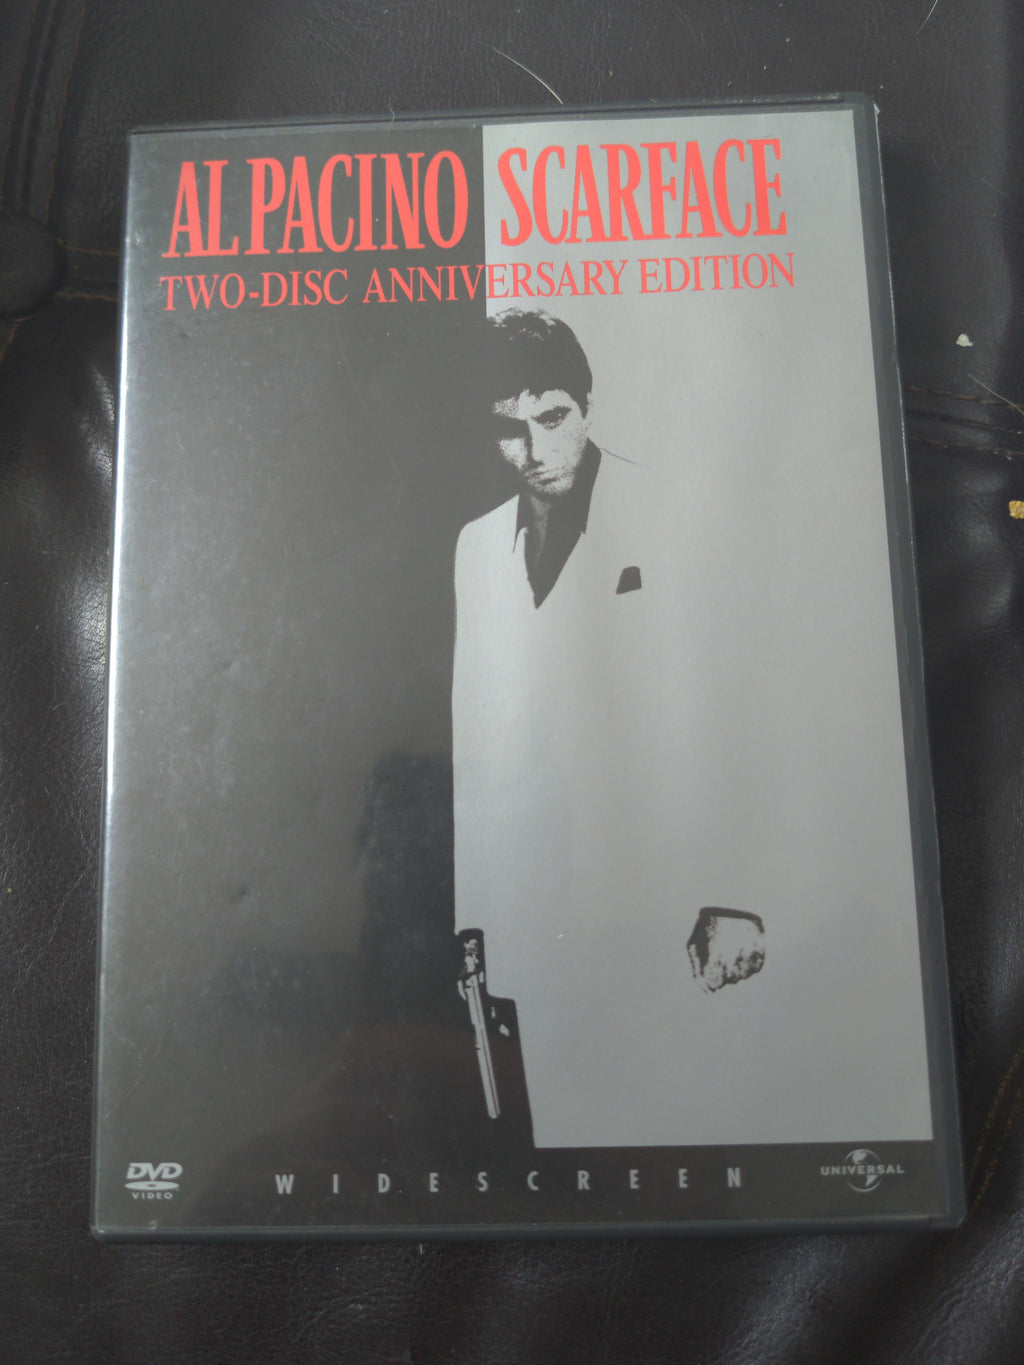 Scarface Two Disc Widescreen Anniversary Edition DVD - Al Pacino